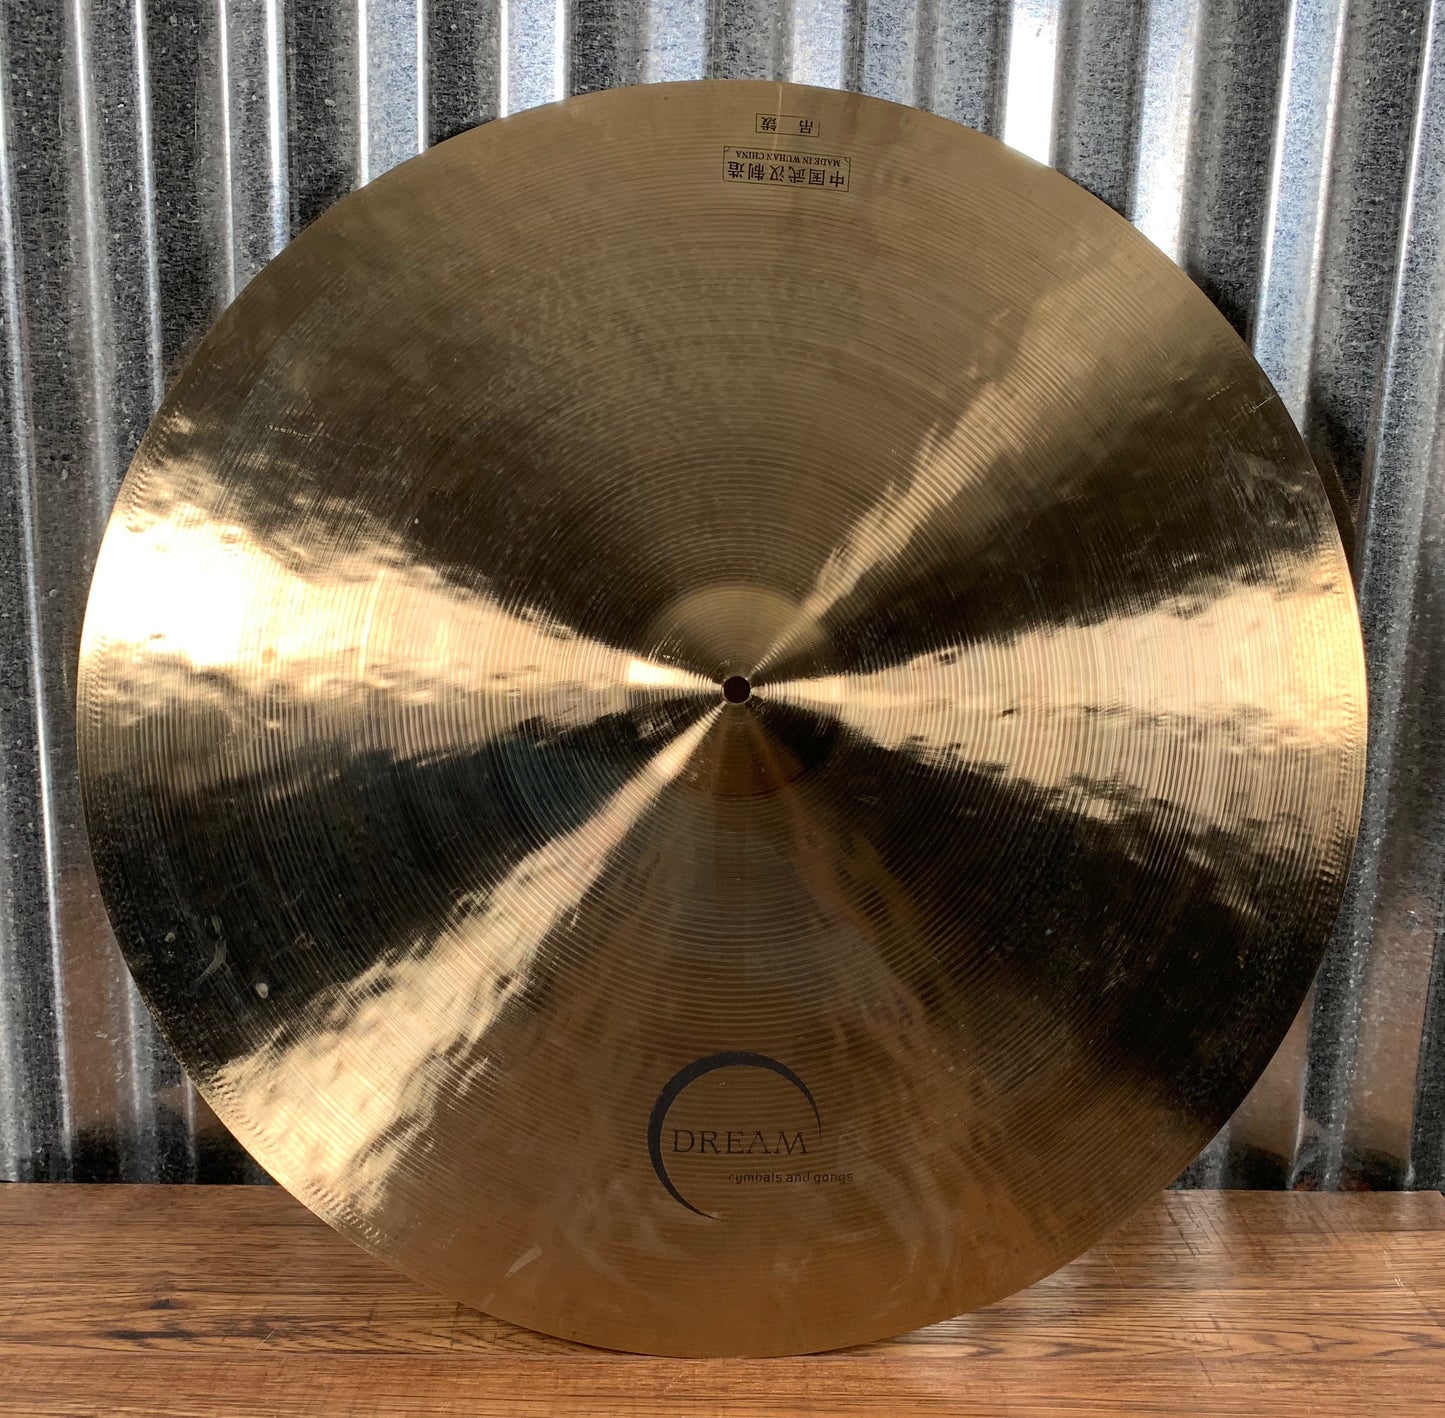 Dream Cymbals C-SBF24 Contact Series Hand Forged & Hammered 24" Small Bell Flat Ride